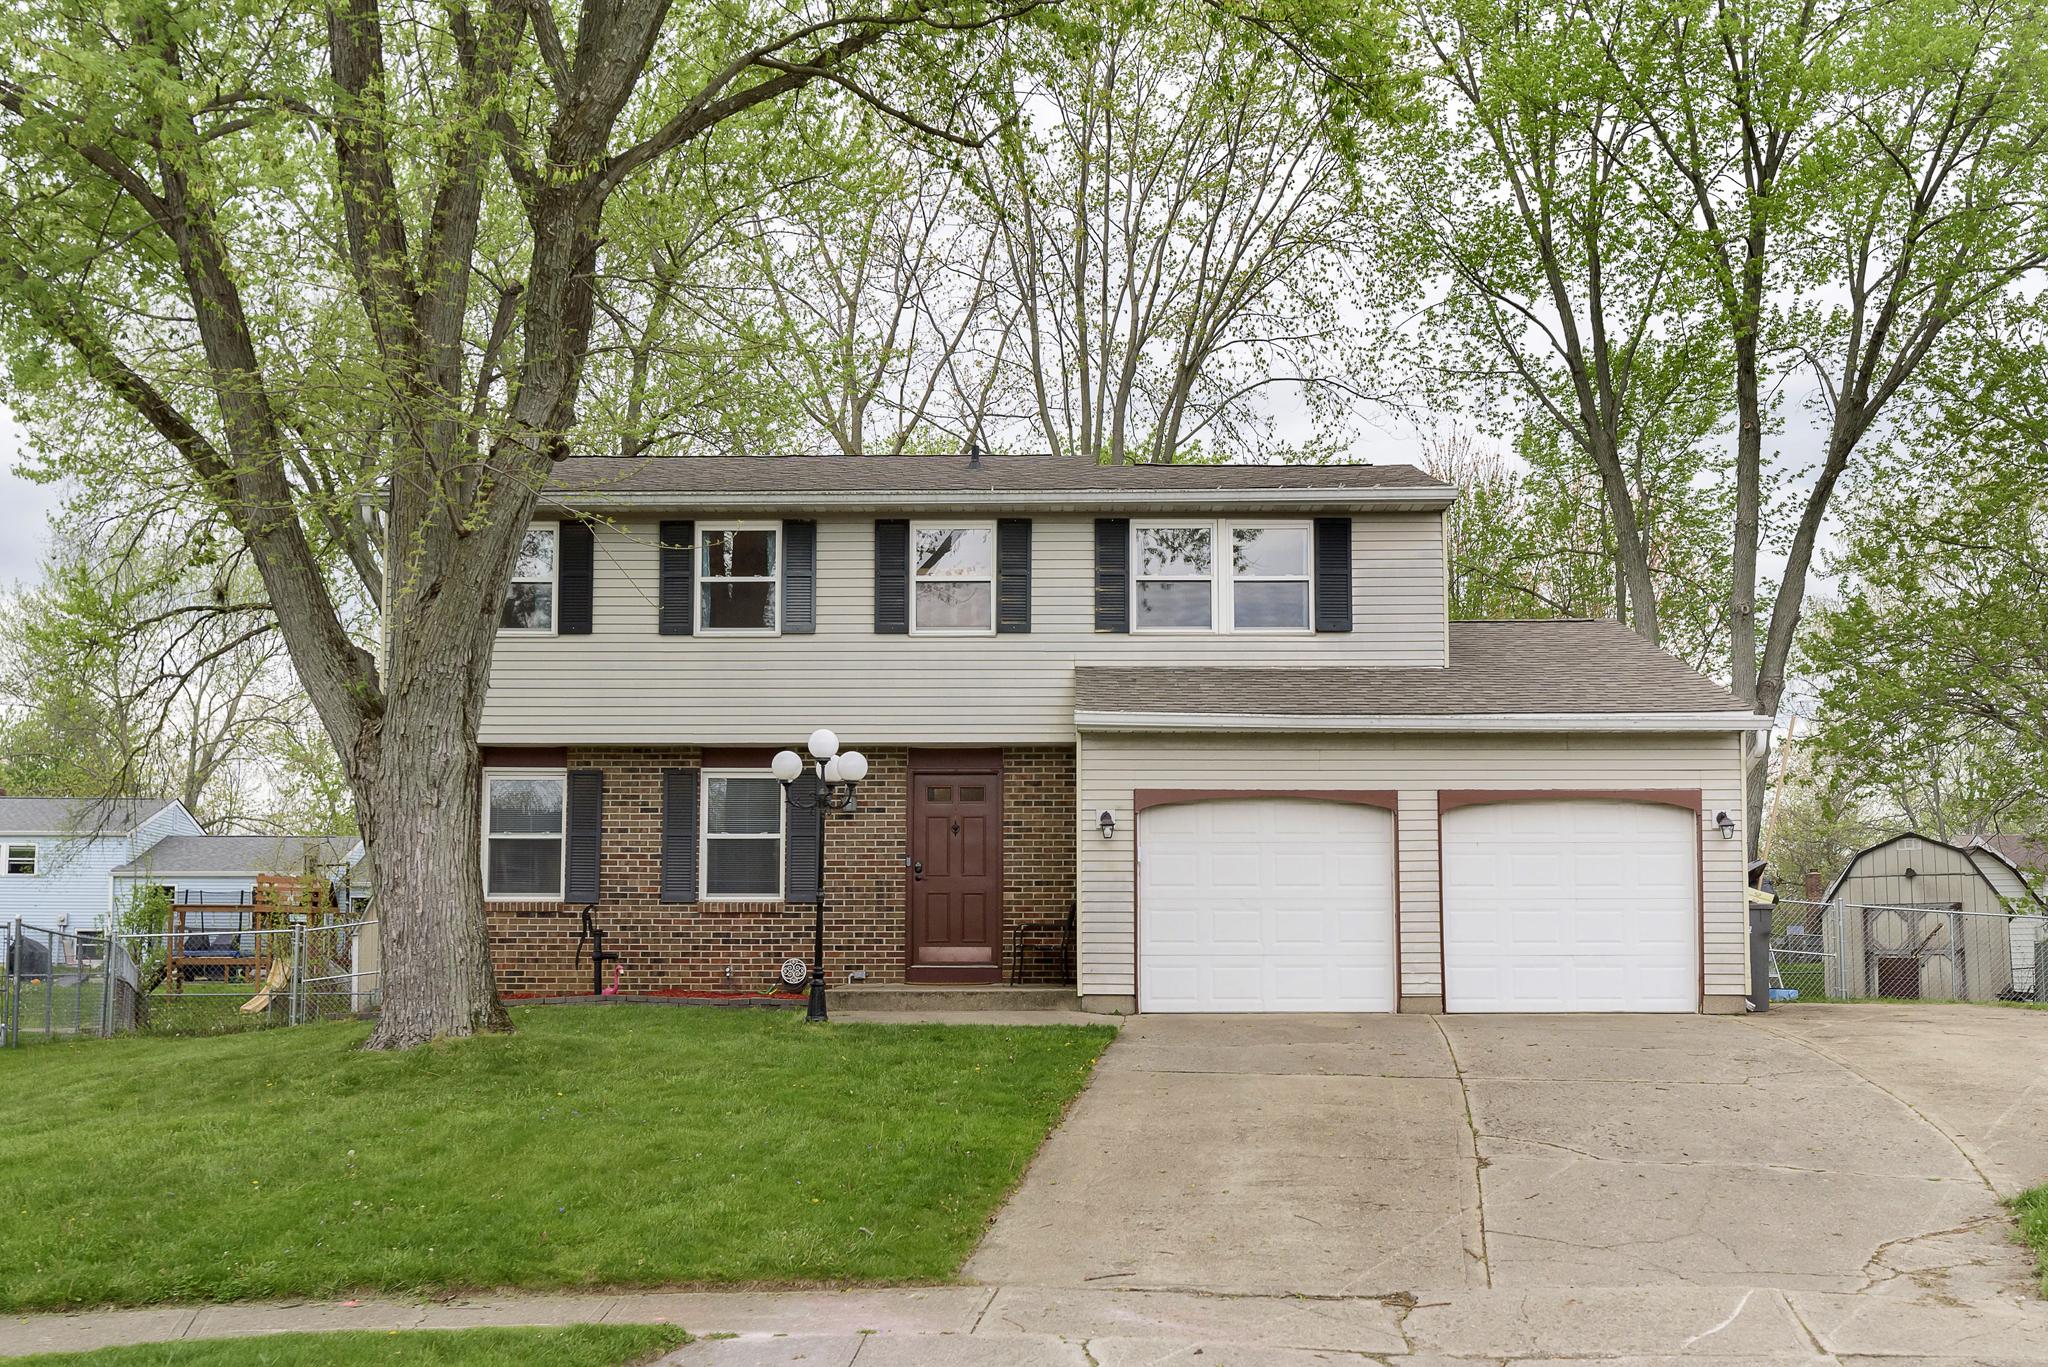 Photo one of 5408 Armstrong Ct Indianapolis IN 46237 | MLS 21974500